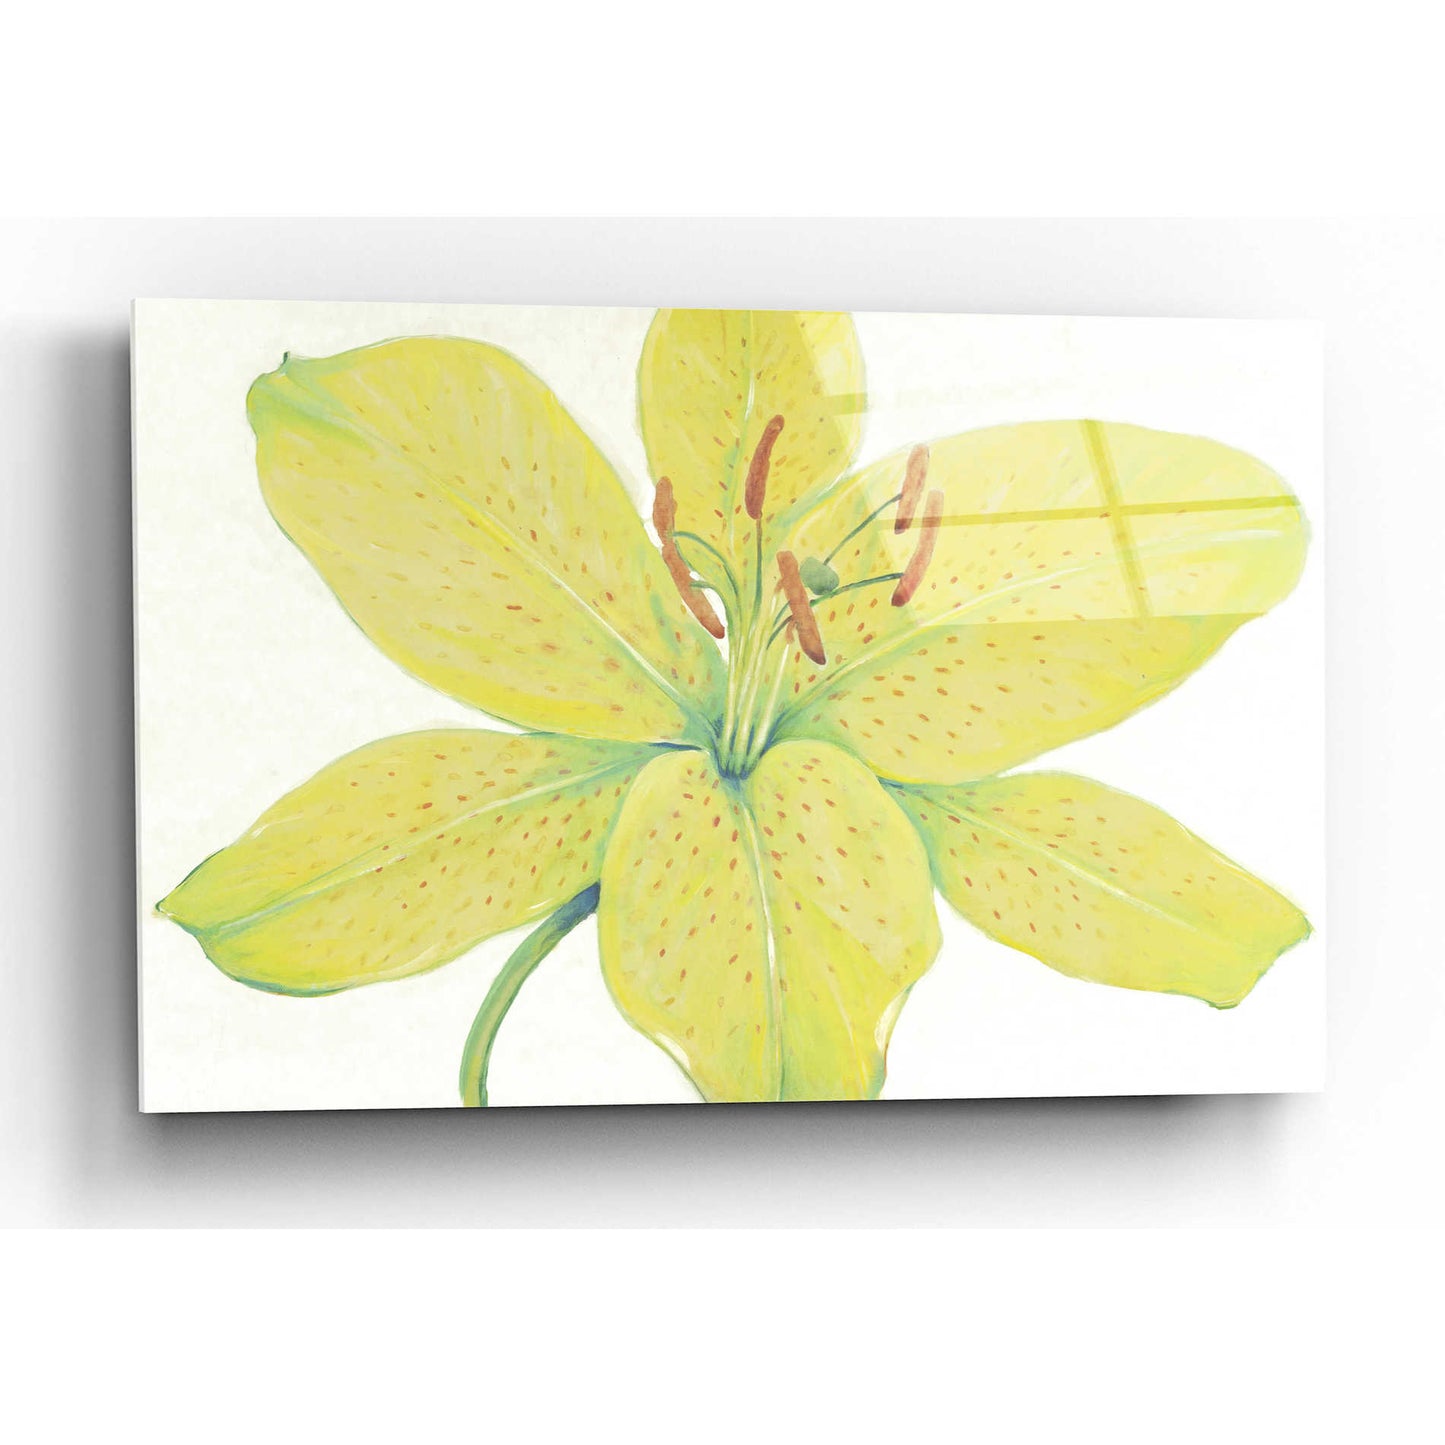 Epic Art 'Citron Tiger Lily I' by Tim O'Toole, Acrylic Glass Wall Art,16x12